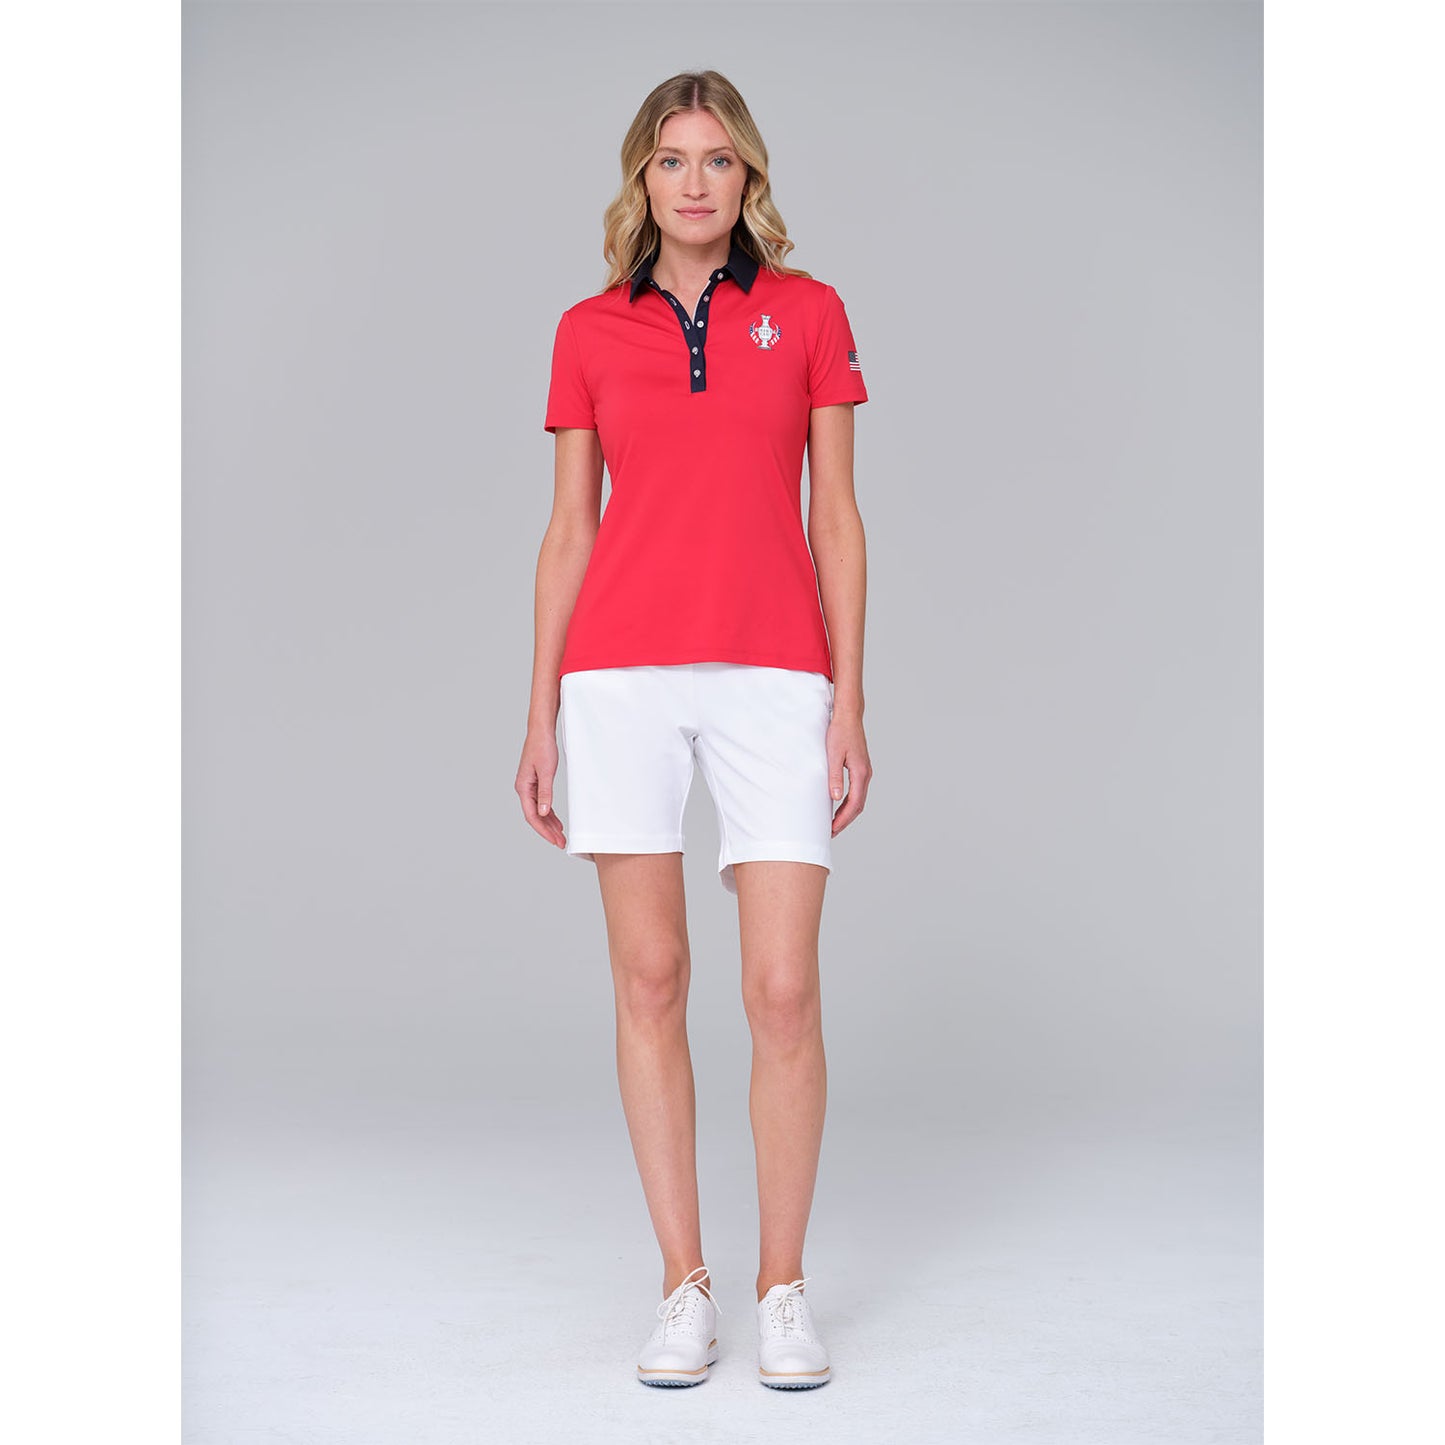 Dunning 2023 LPGA Official Solheim Cup Team Uniform Women's Short Sleeve Performance Polo in Glory / Halo - Front View